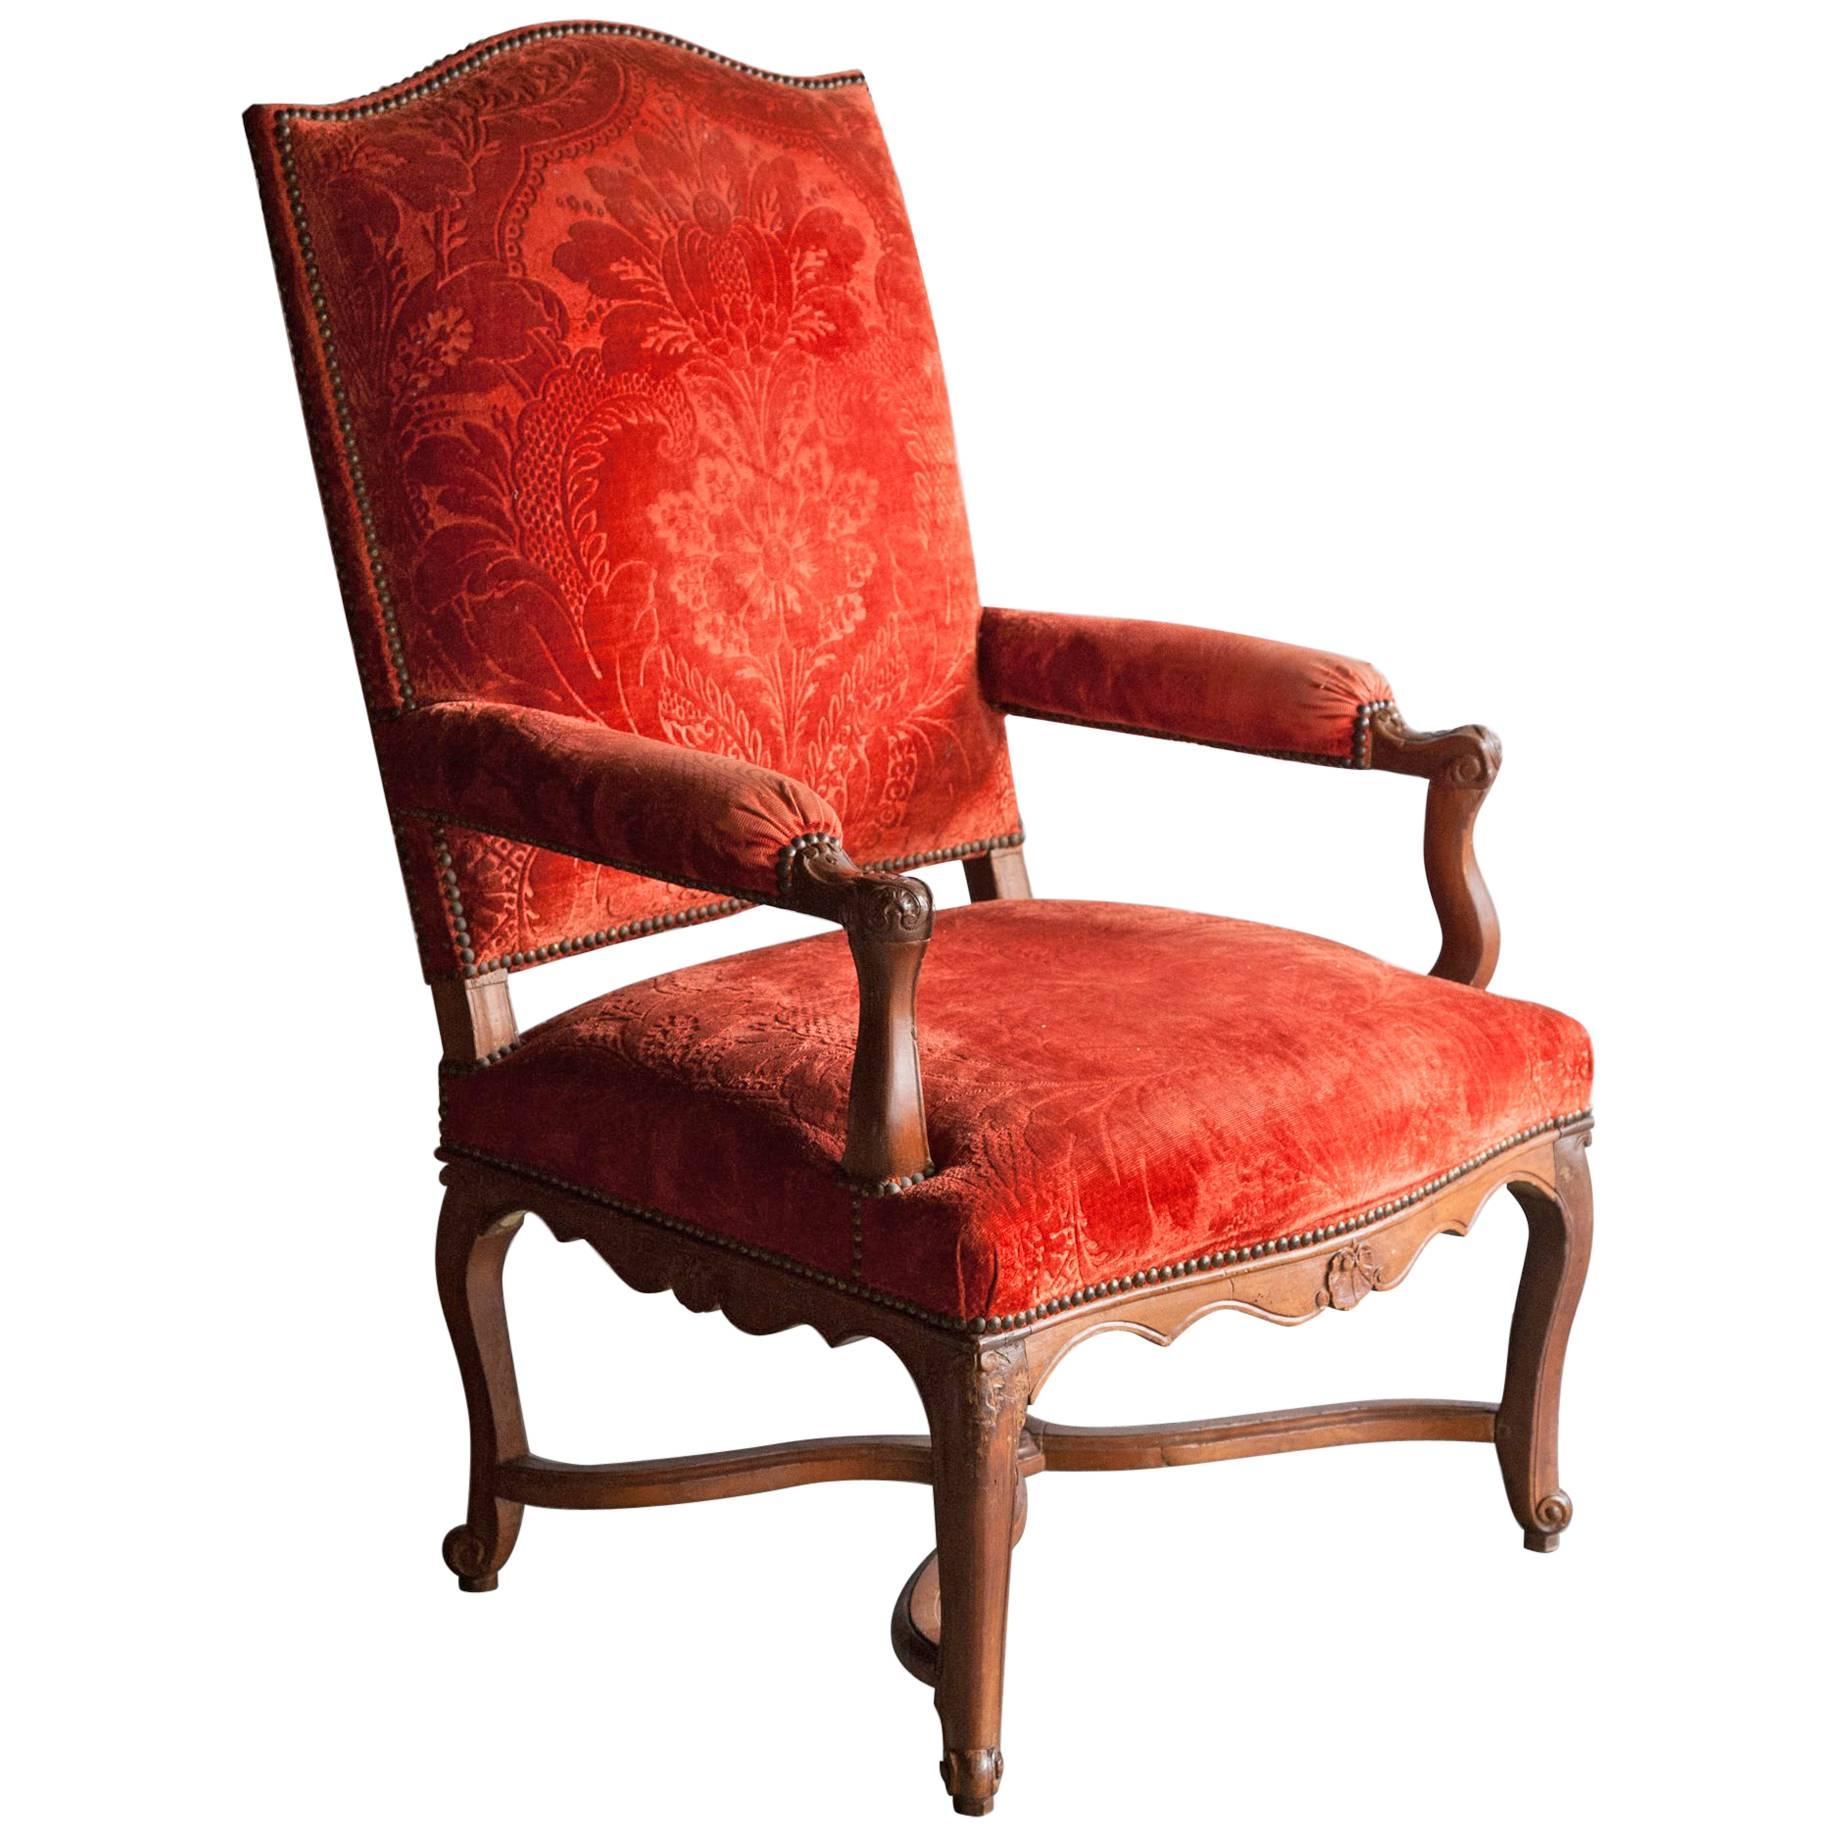 Large 18th Century French Régence Fauteuil or Open Armchair For Sale